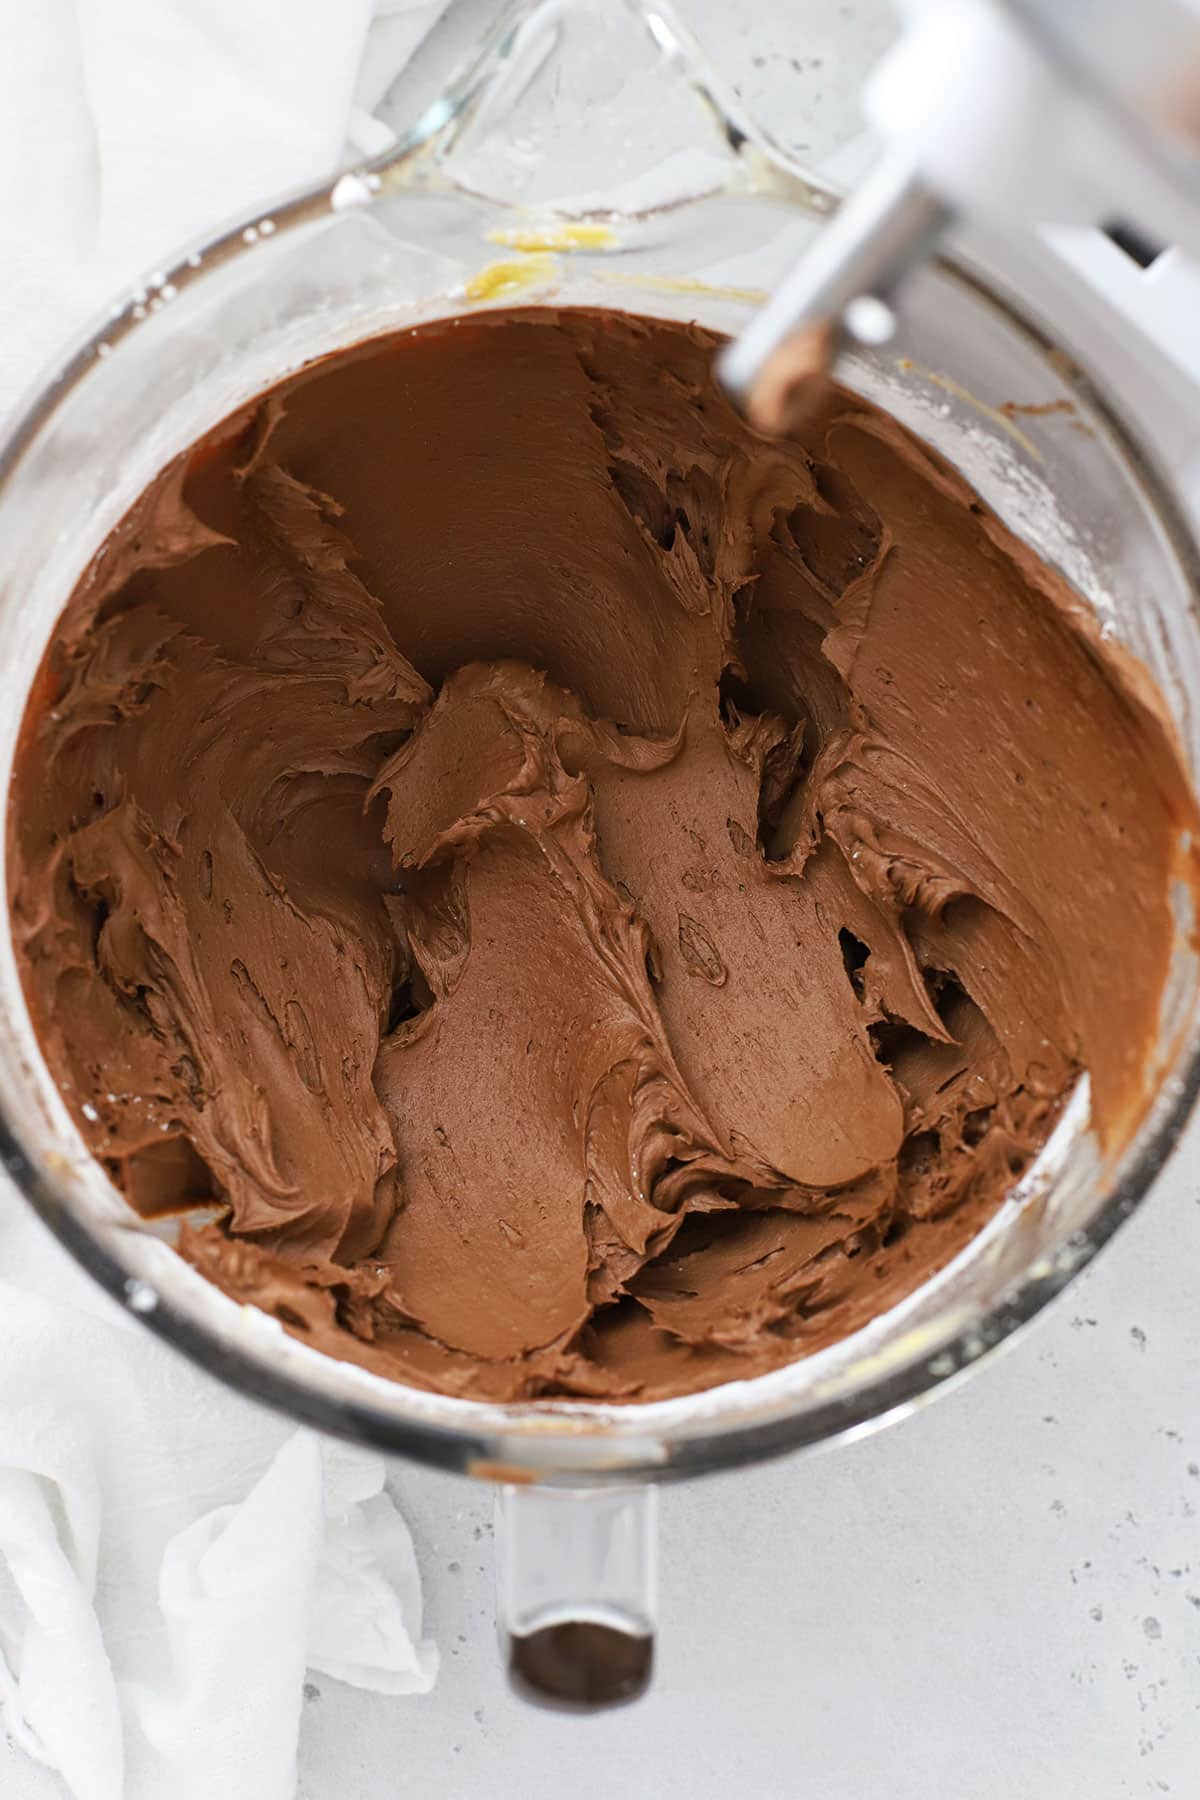 freshly mixed chocolate buttercream frosting in a glass mixing bowl